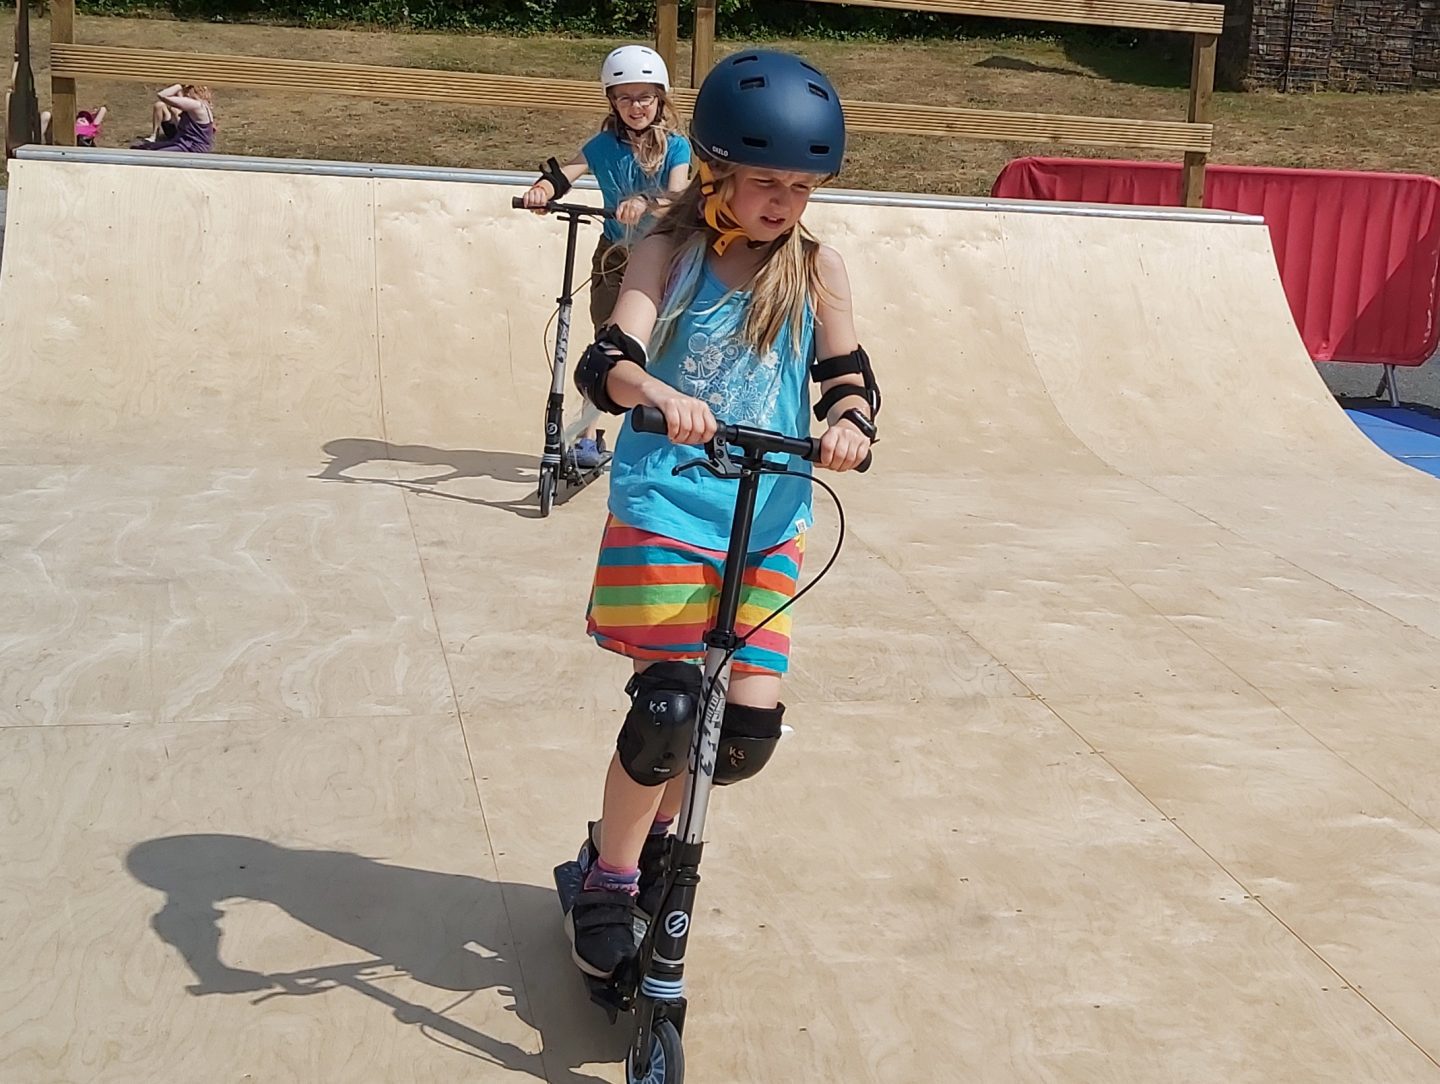 Two girls on scooters on a skate ramp with helmets and knee pads on